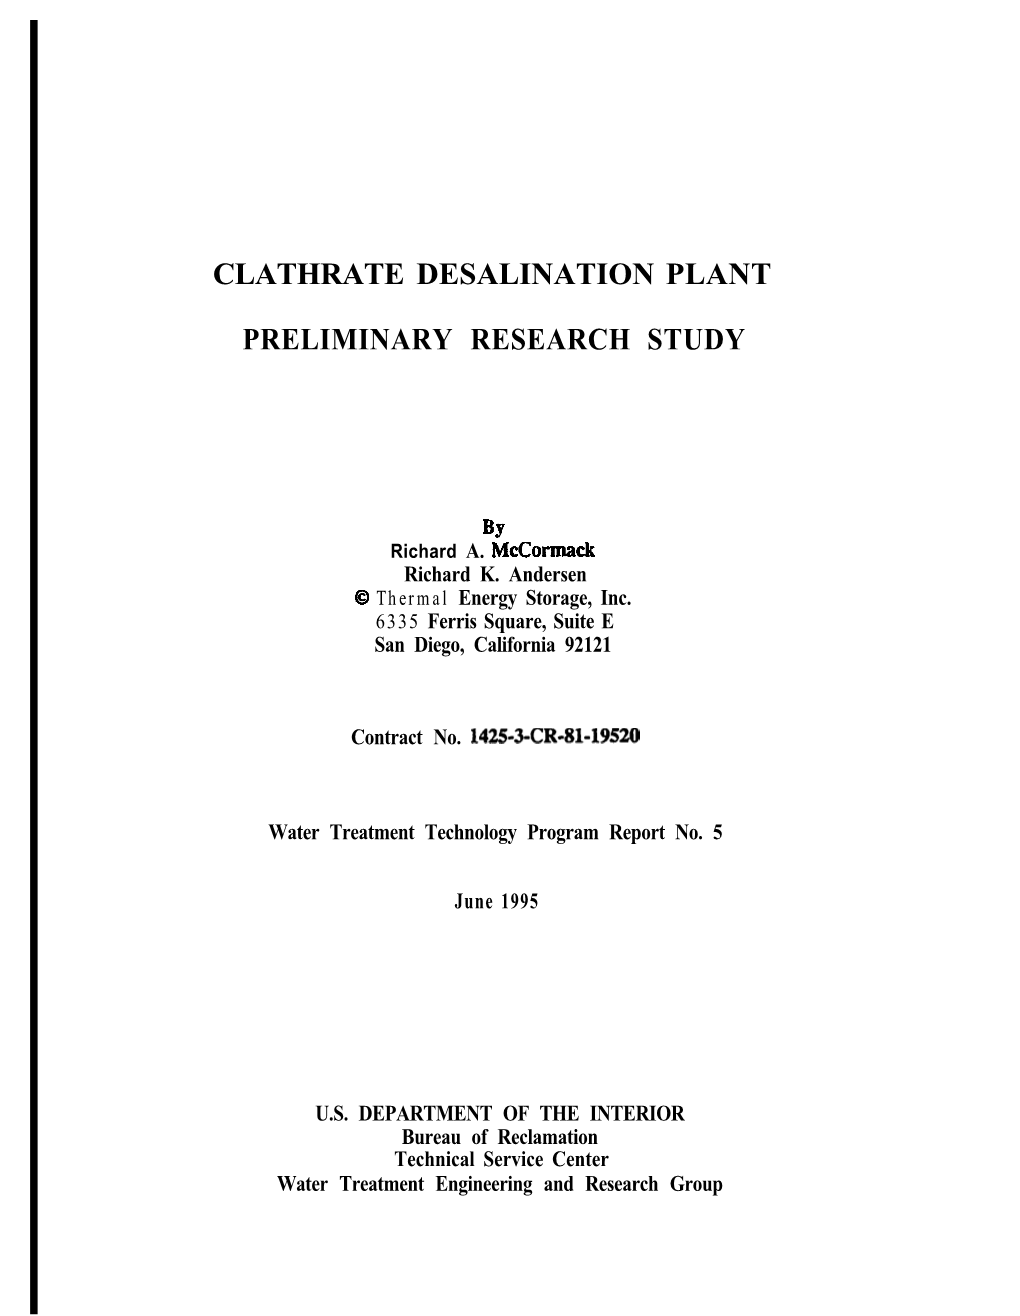 Clathrate Desalination Plant, Preliminary Research Study